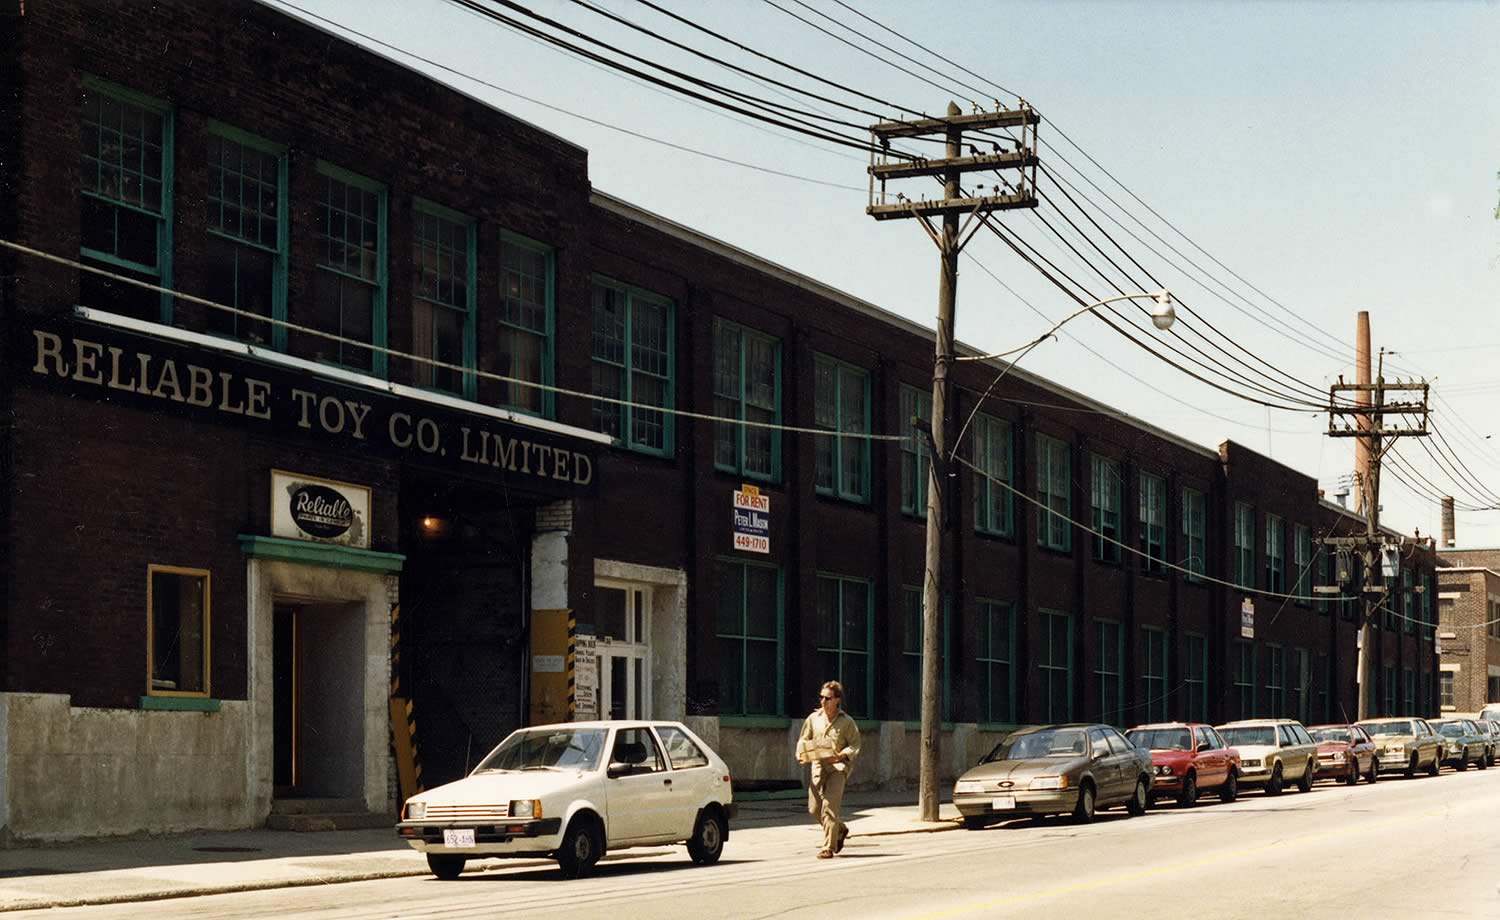 Colour photograph of the Reliable Toy factory on Carlaw Avenue. The factory is closed and there are 'For Rent' signs on the outside of the building. Several cars are parked outside and a delivery person is walking with a package.